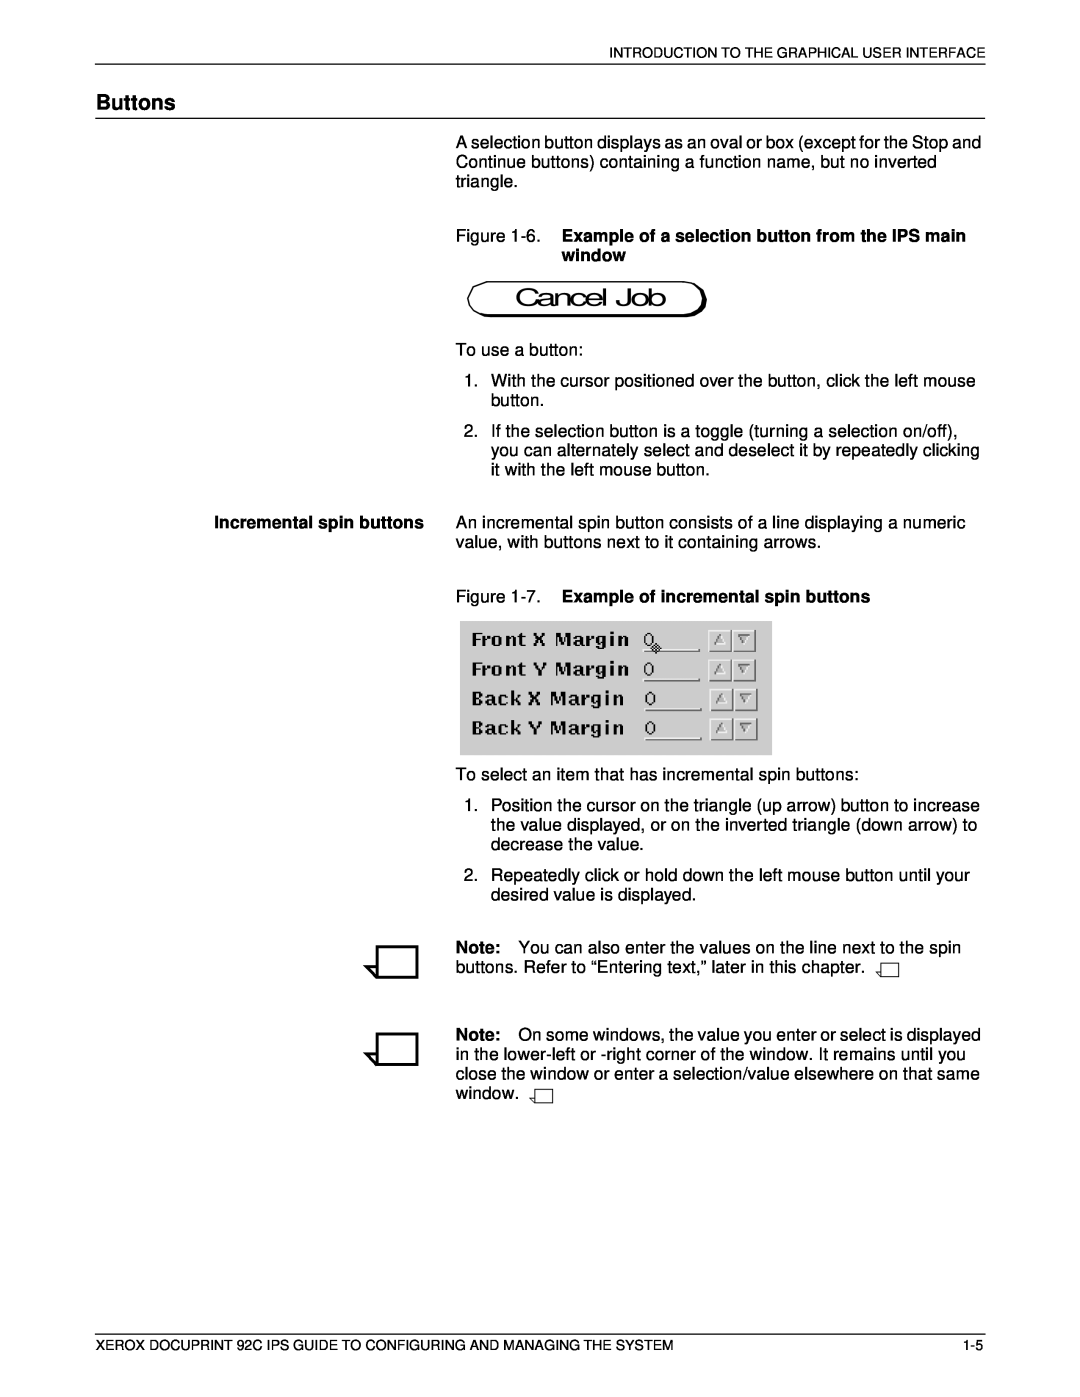 Xerox 92C IPS manual Buttons, Cancel Job, 6. Example of a selection button from the IPS main window 